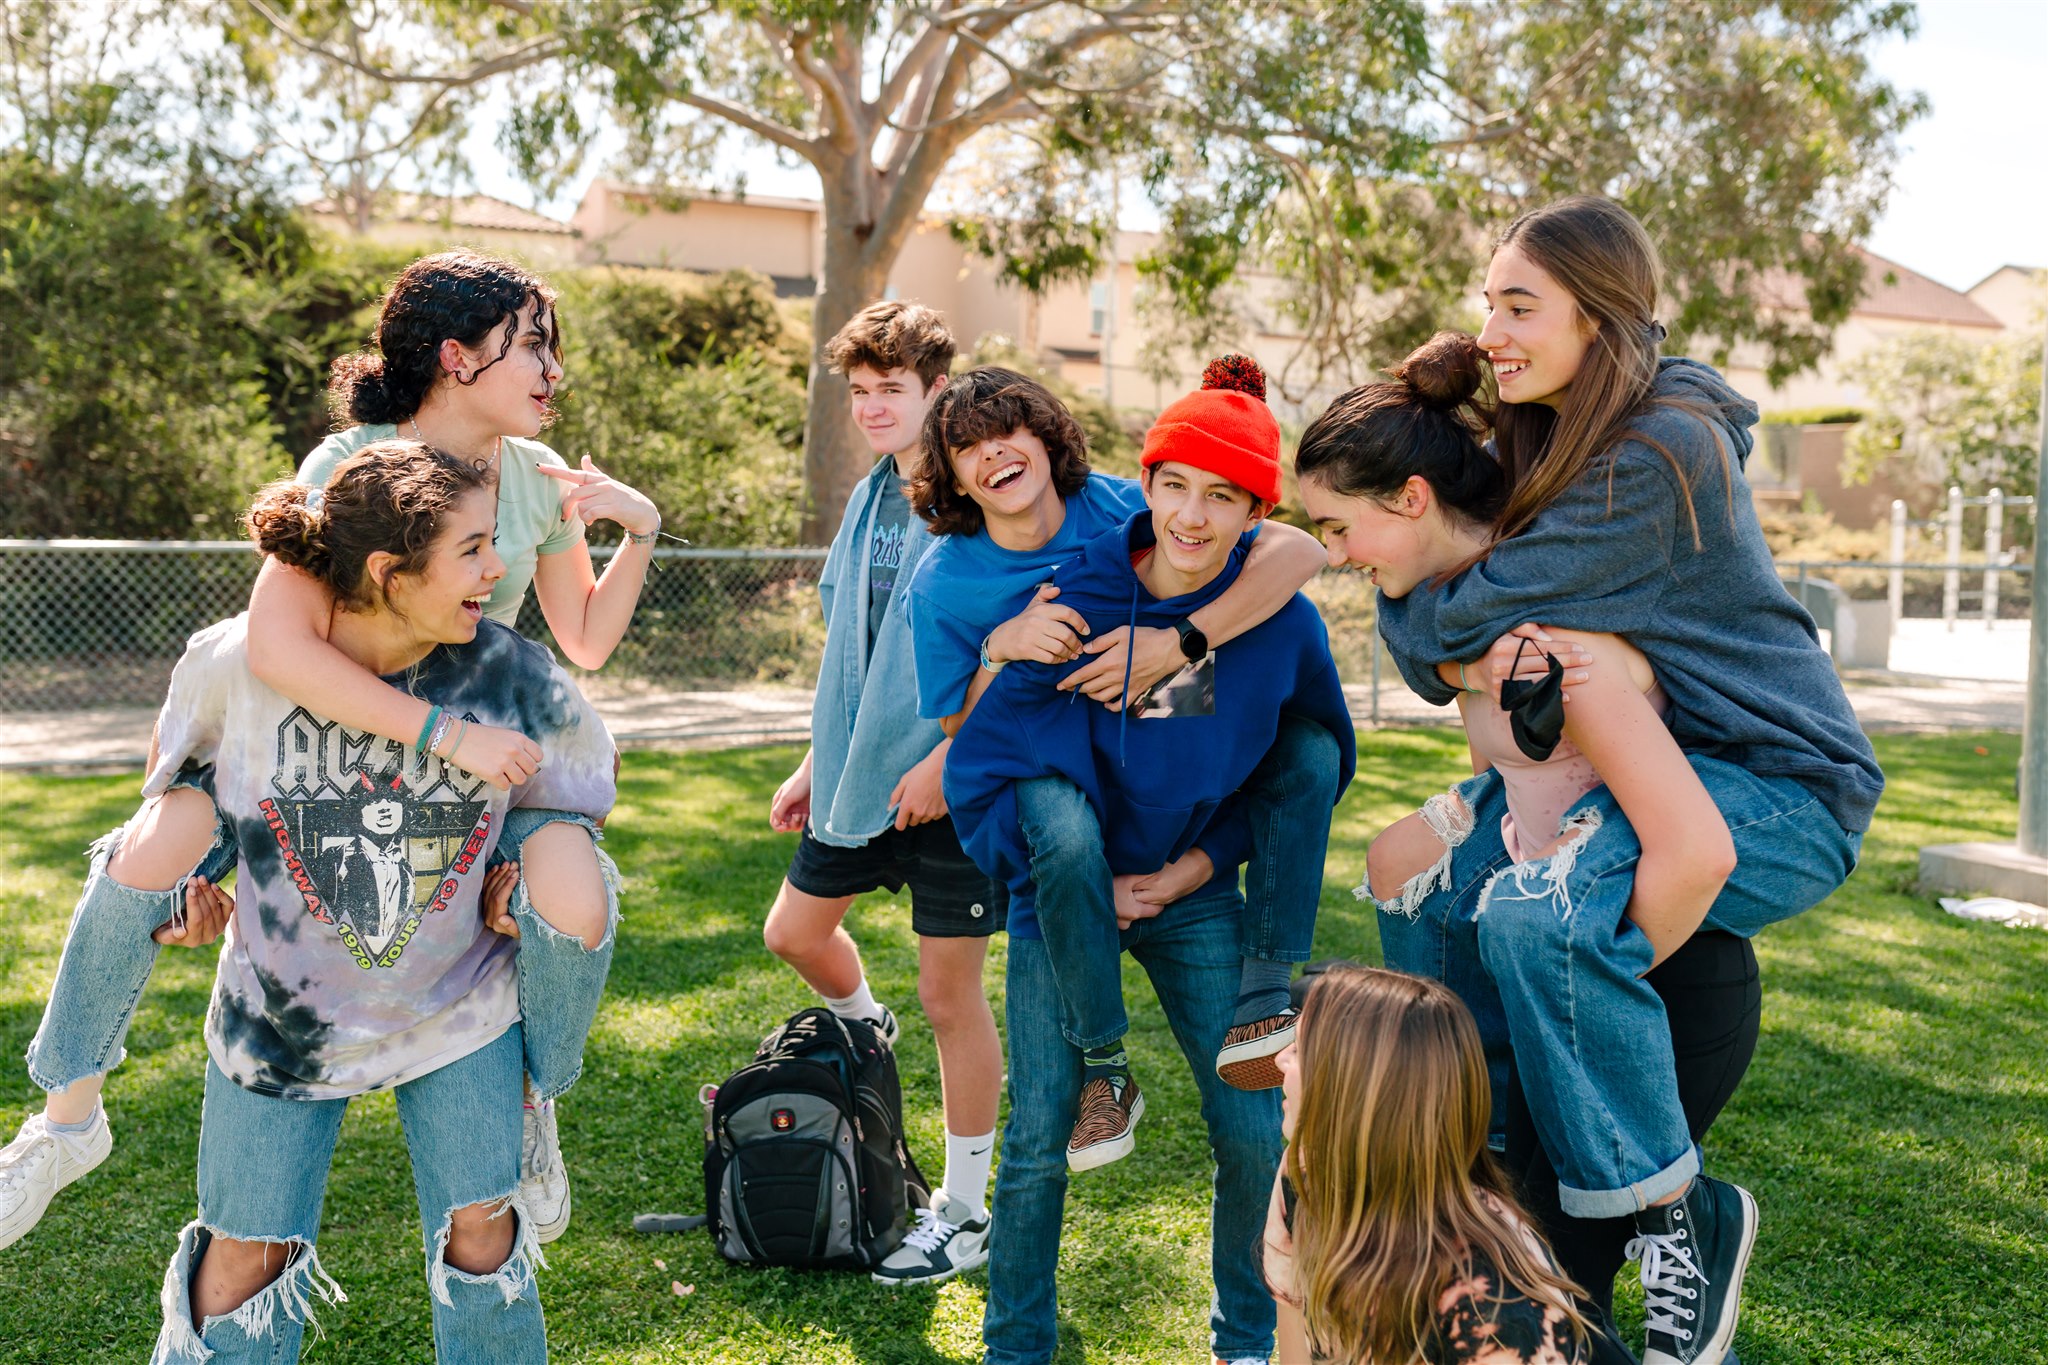 High school students at SET High in San Diego giving piggy-back rides outside